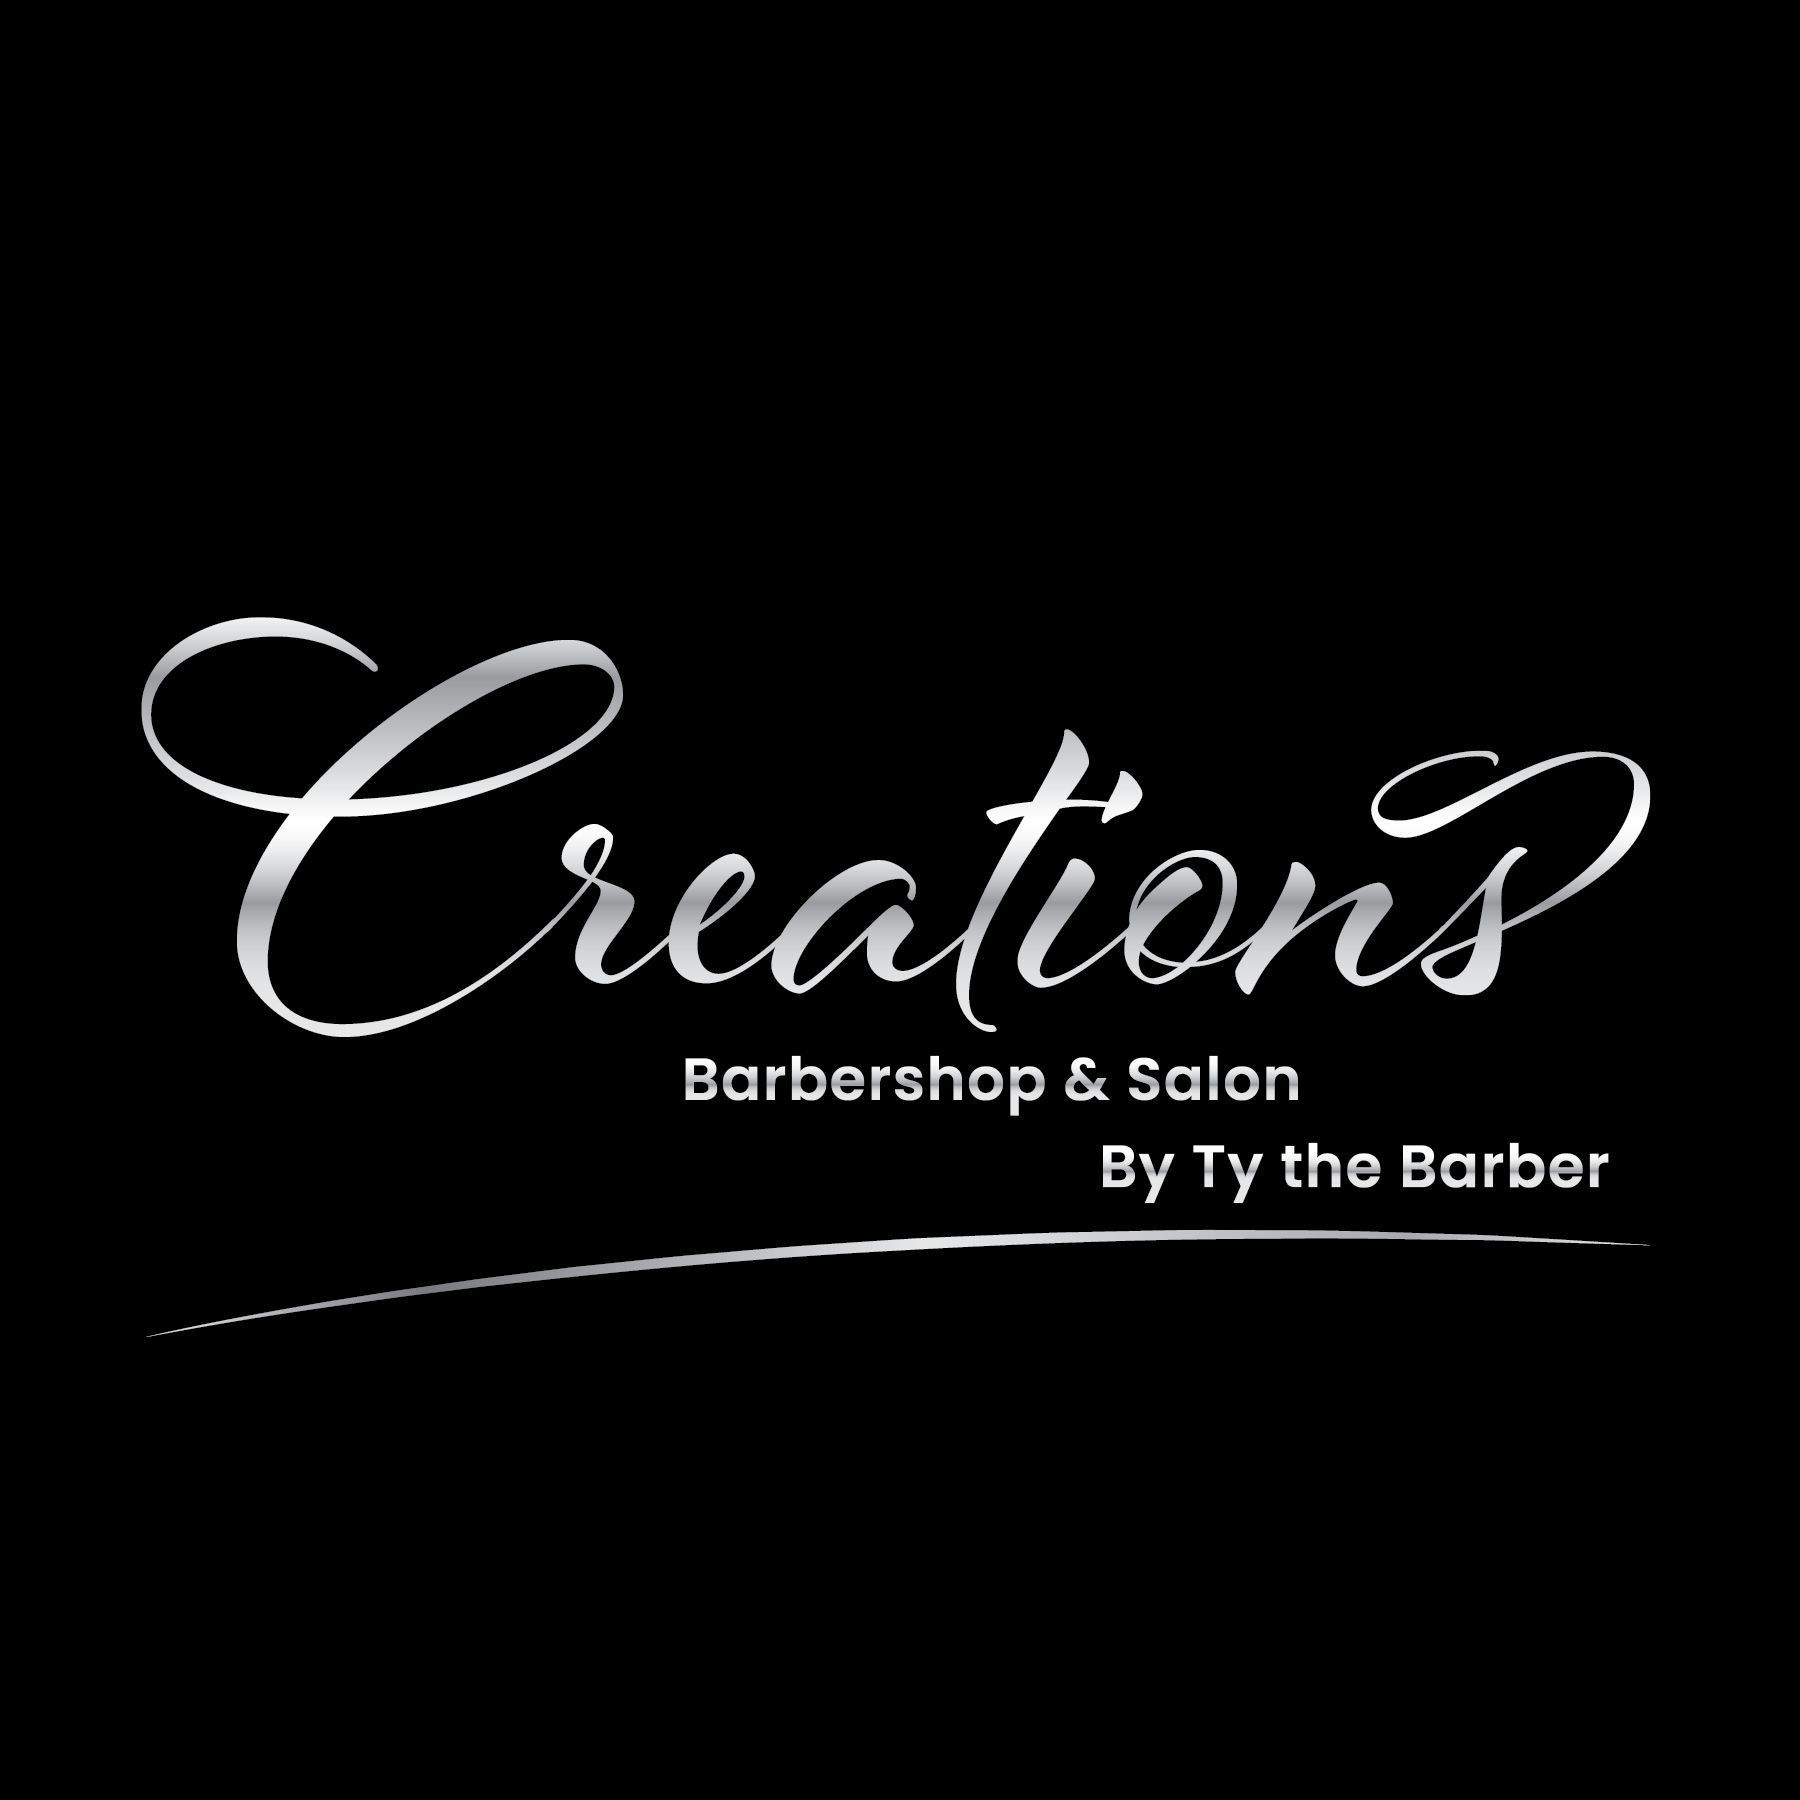 Ty The Barber @ Creations, 1205 BUTTE AVE, SUITE #2, Helena, 59601